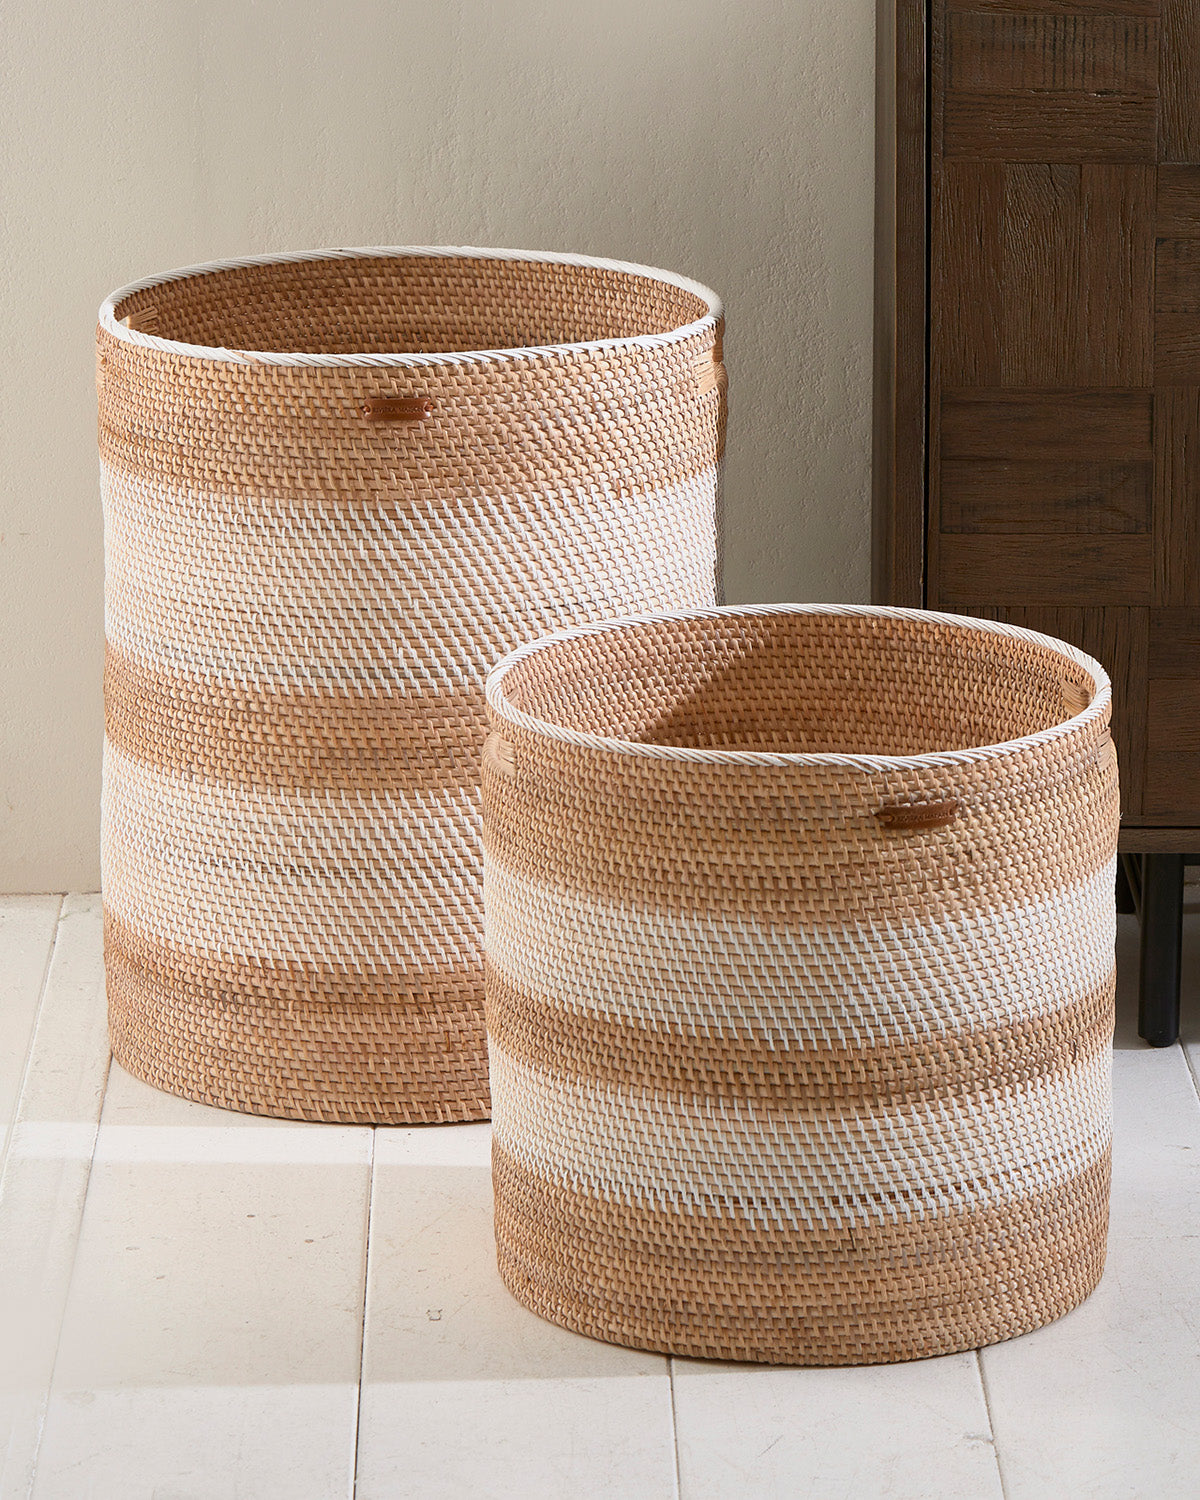 BASKET SET OF 2  made from woven Rattan white striped